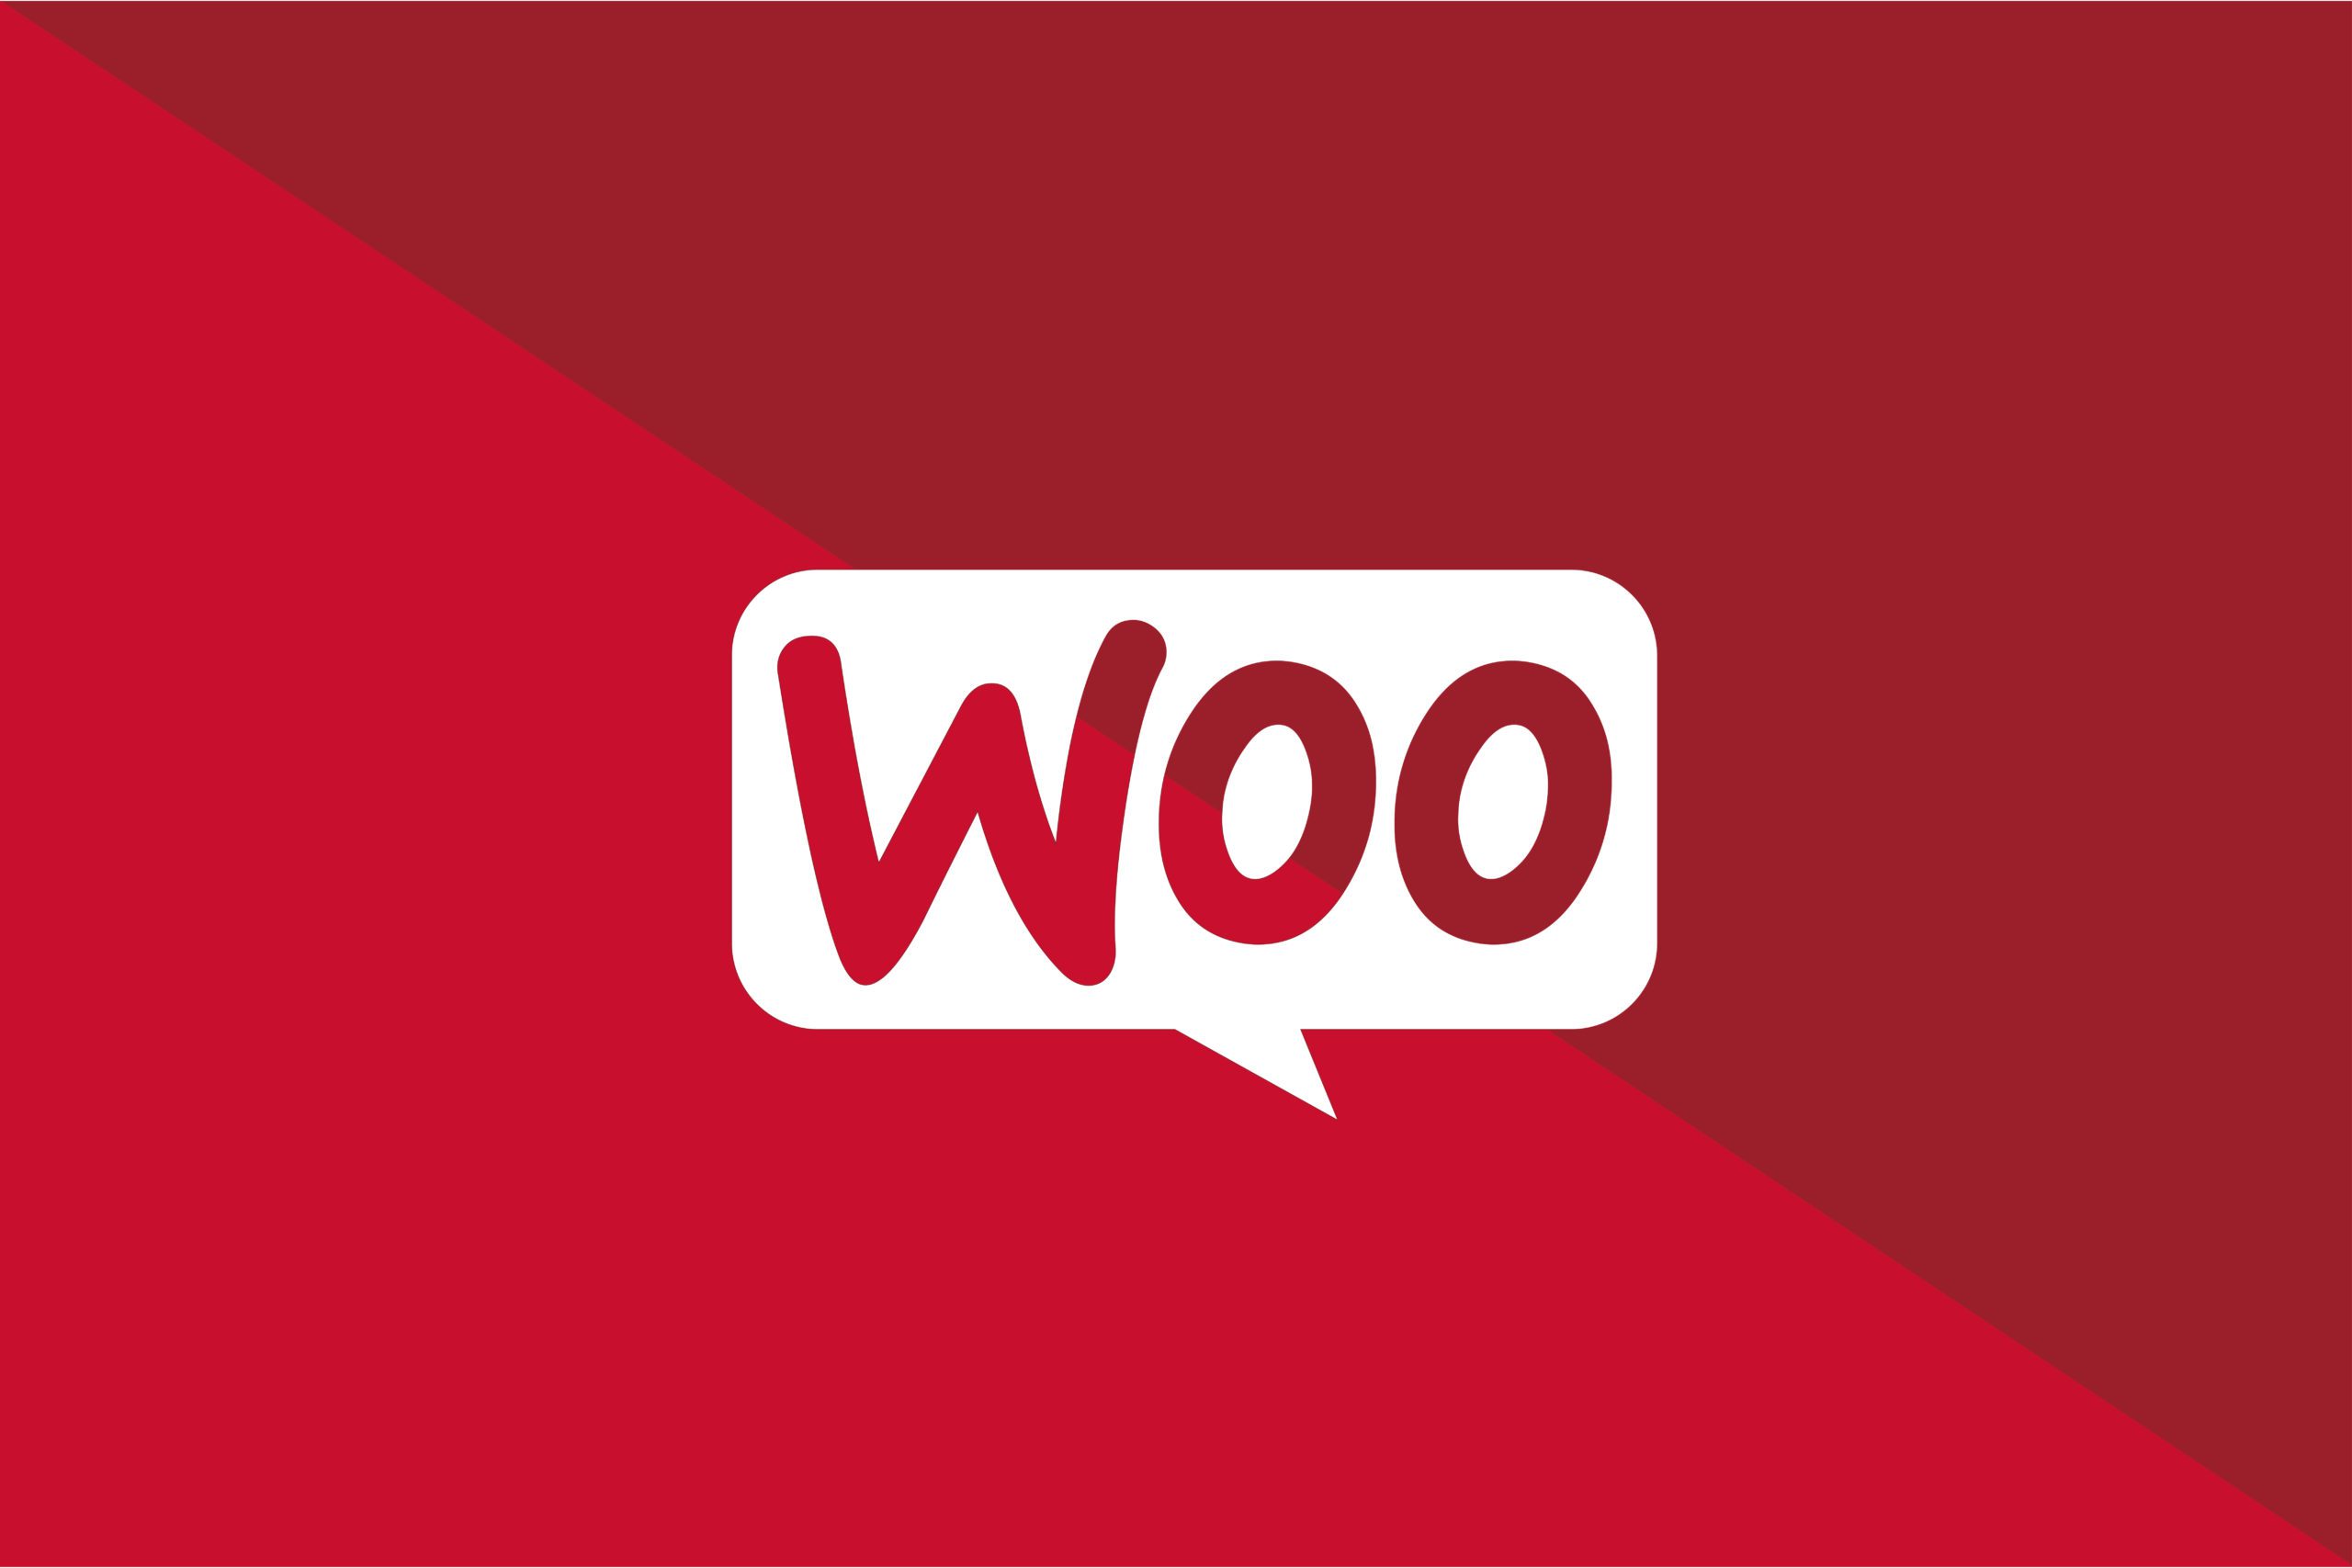 White WooCommerce logo on a red background representing the web design services at ipulse creative agency Hong Kong